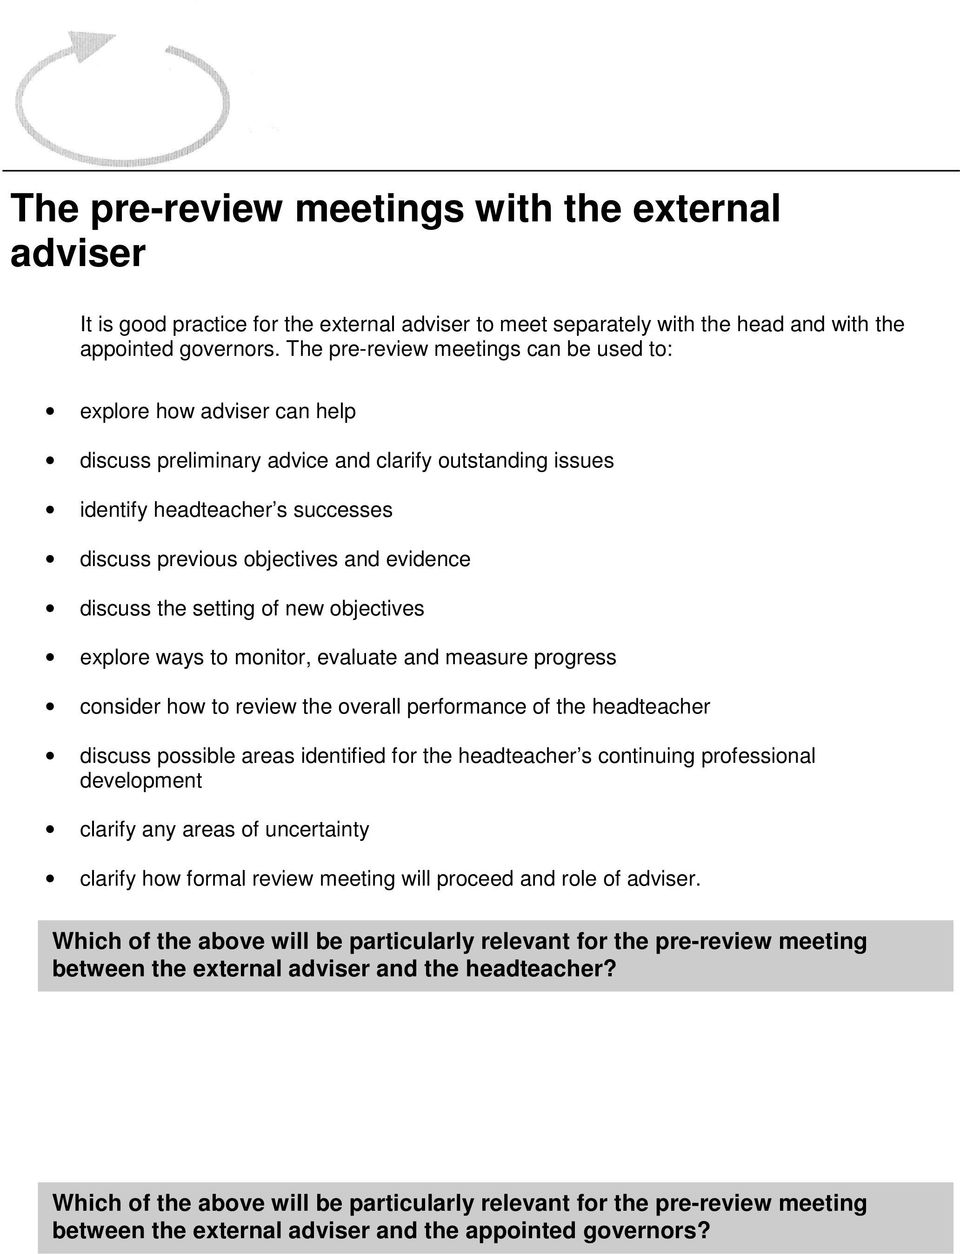 evidence discuss the setting of new objectives explore ways to monitor, evaluate and measure progress consider how to review the overall performance of the headteacher discuss possible areas